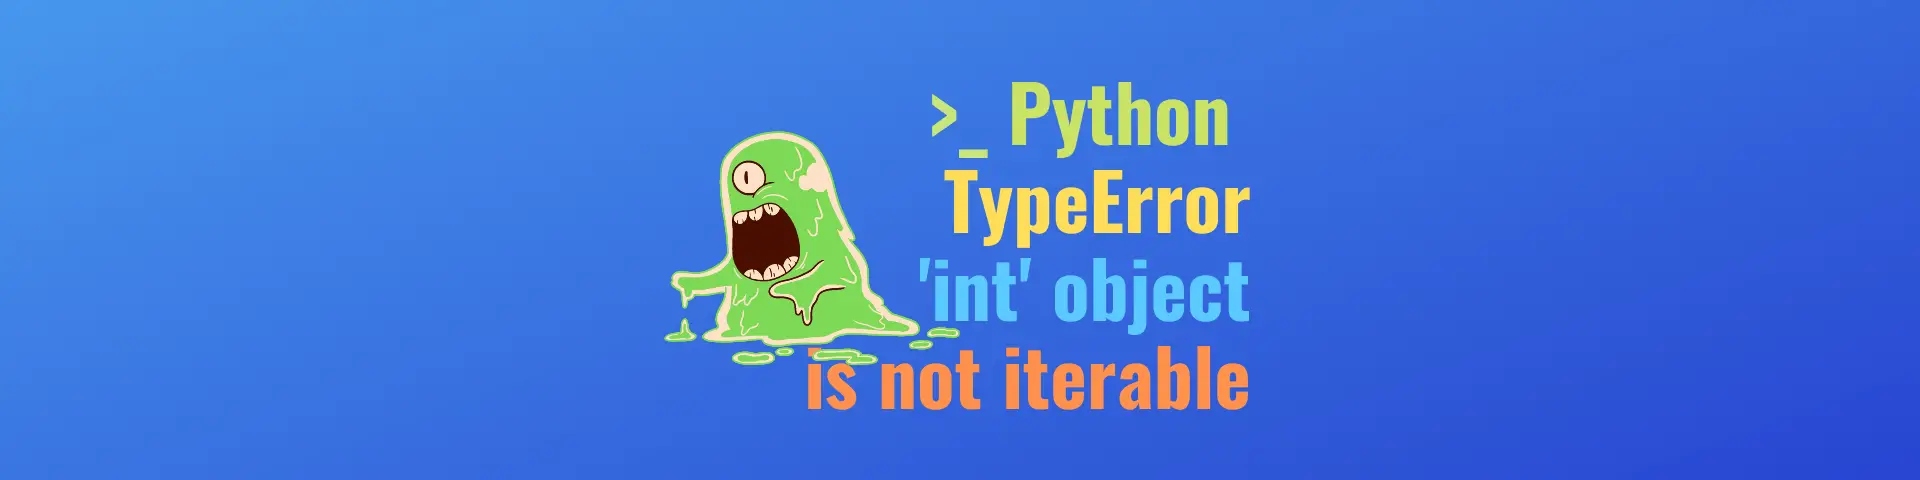 Python Typeerror Int Object Is Not Iterable What To Do To Fix It